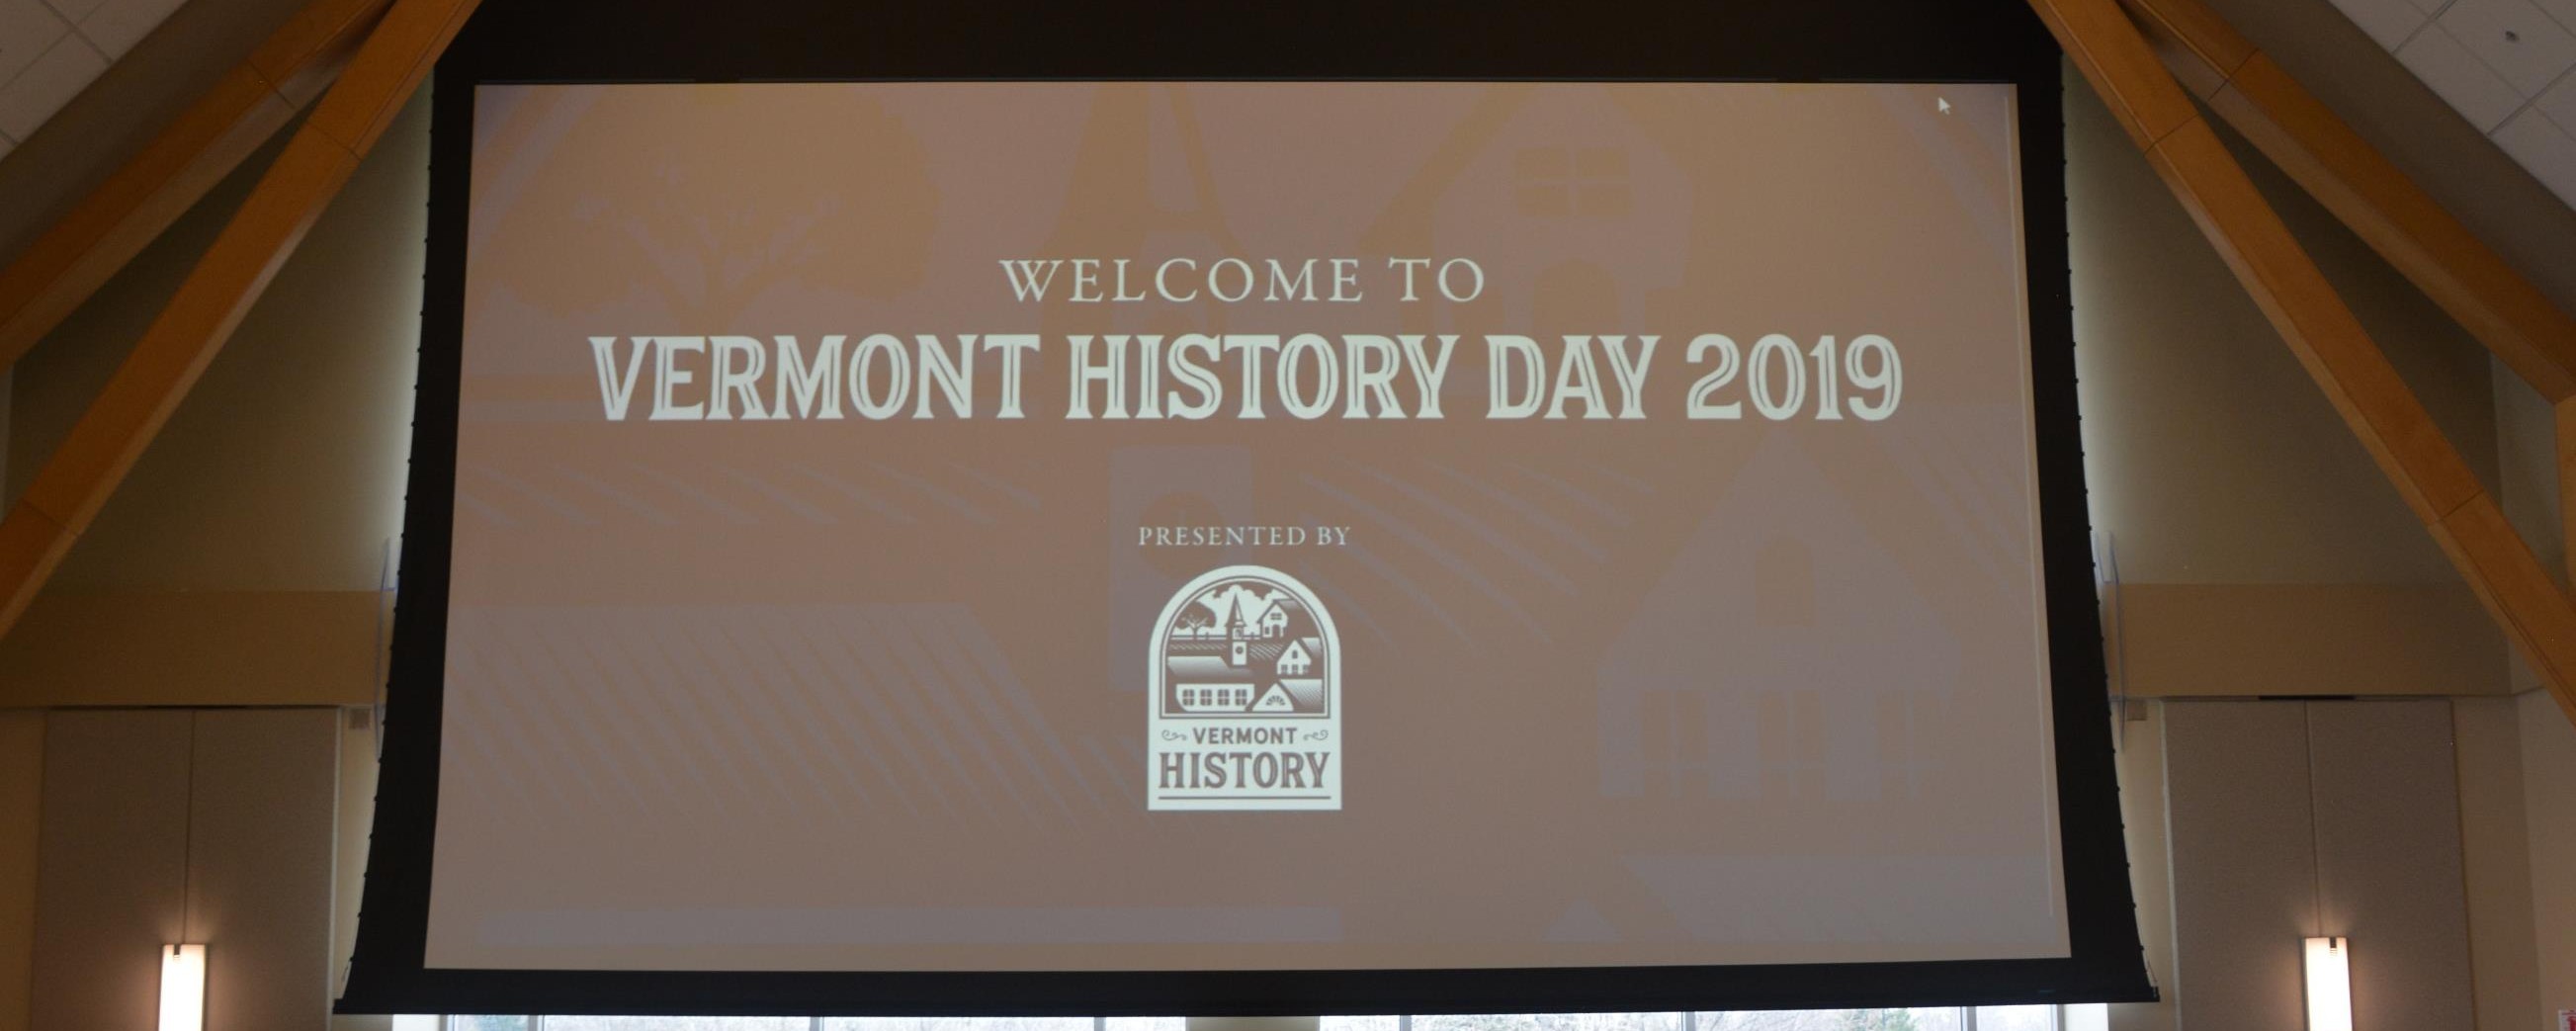 sign with text Welcome to Vermont History Day 2019